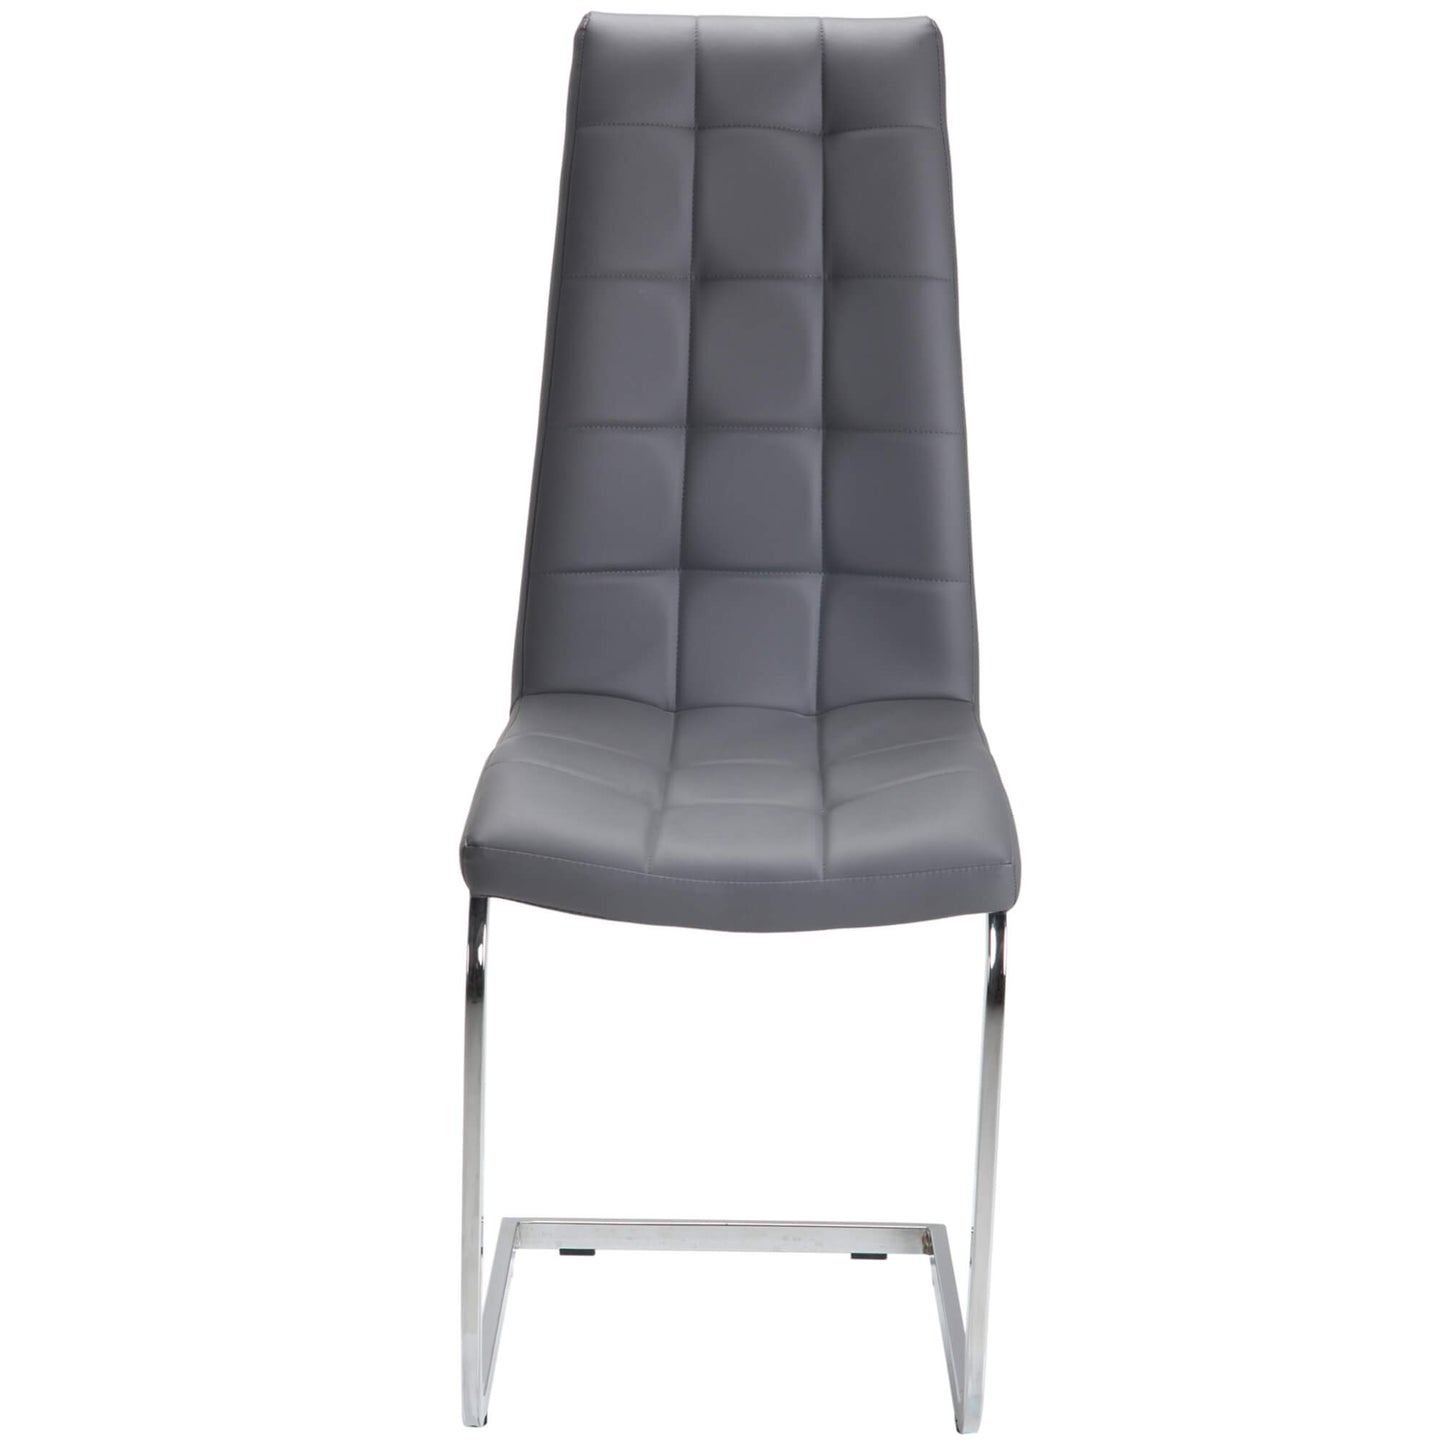 Belair | Modern, Metal PU Leather Dining Chairs | Set Of 4 | Grey